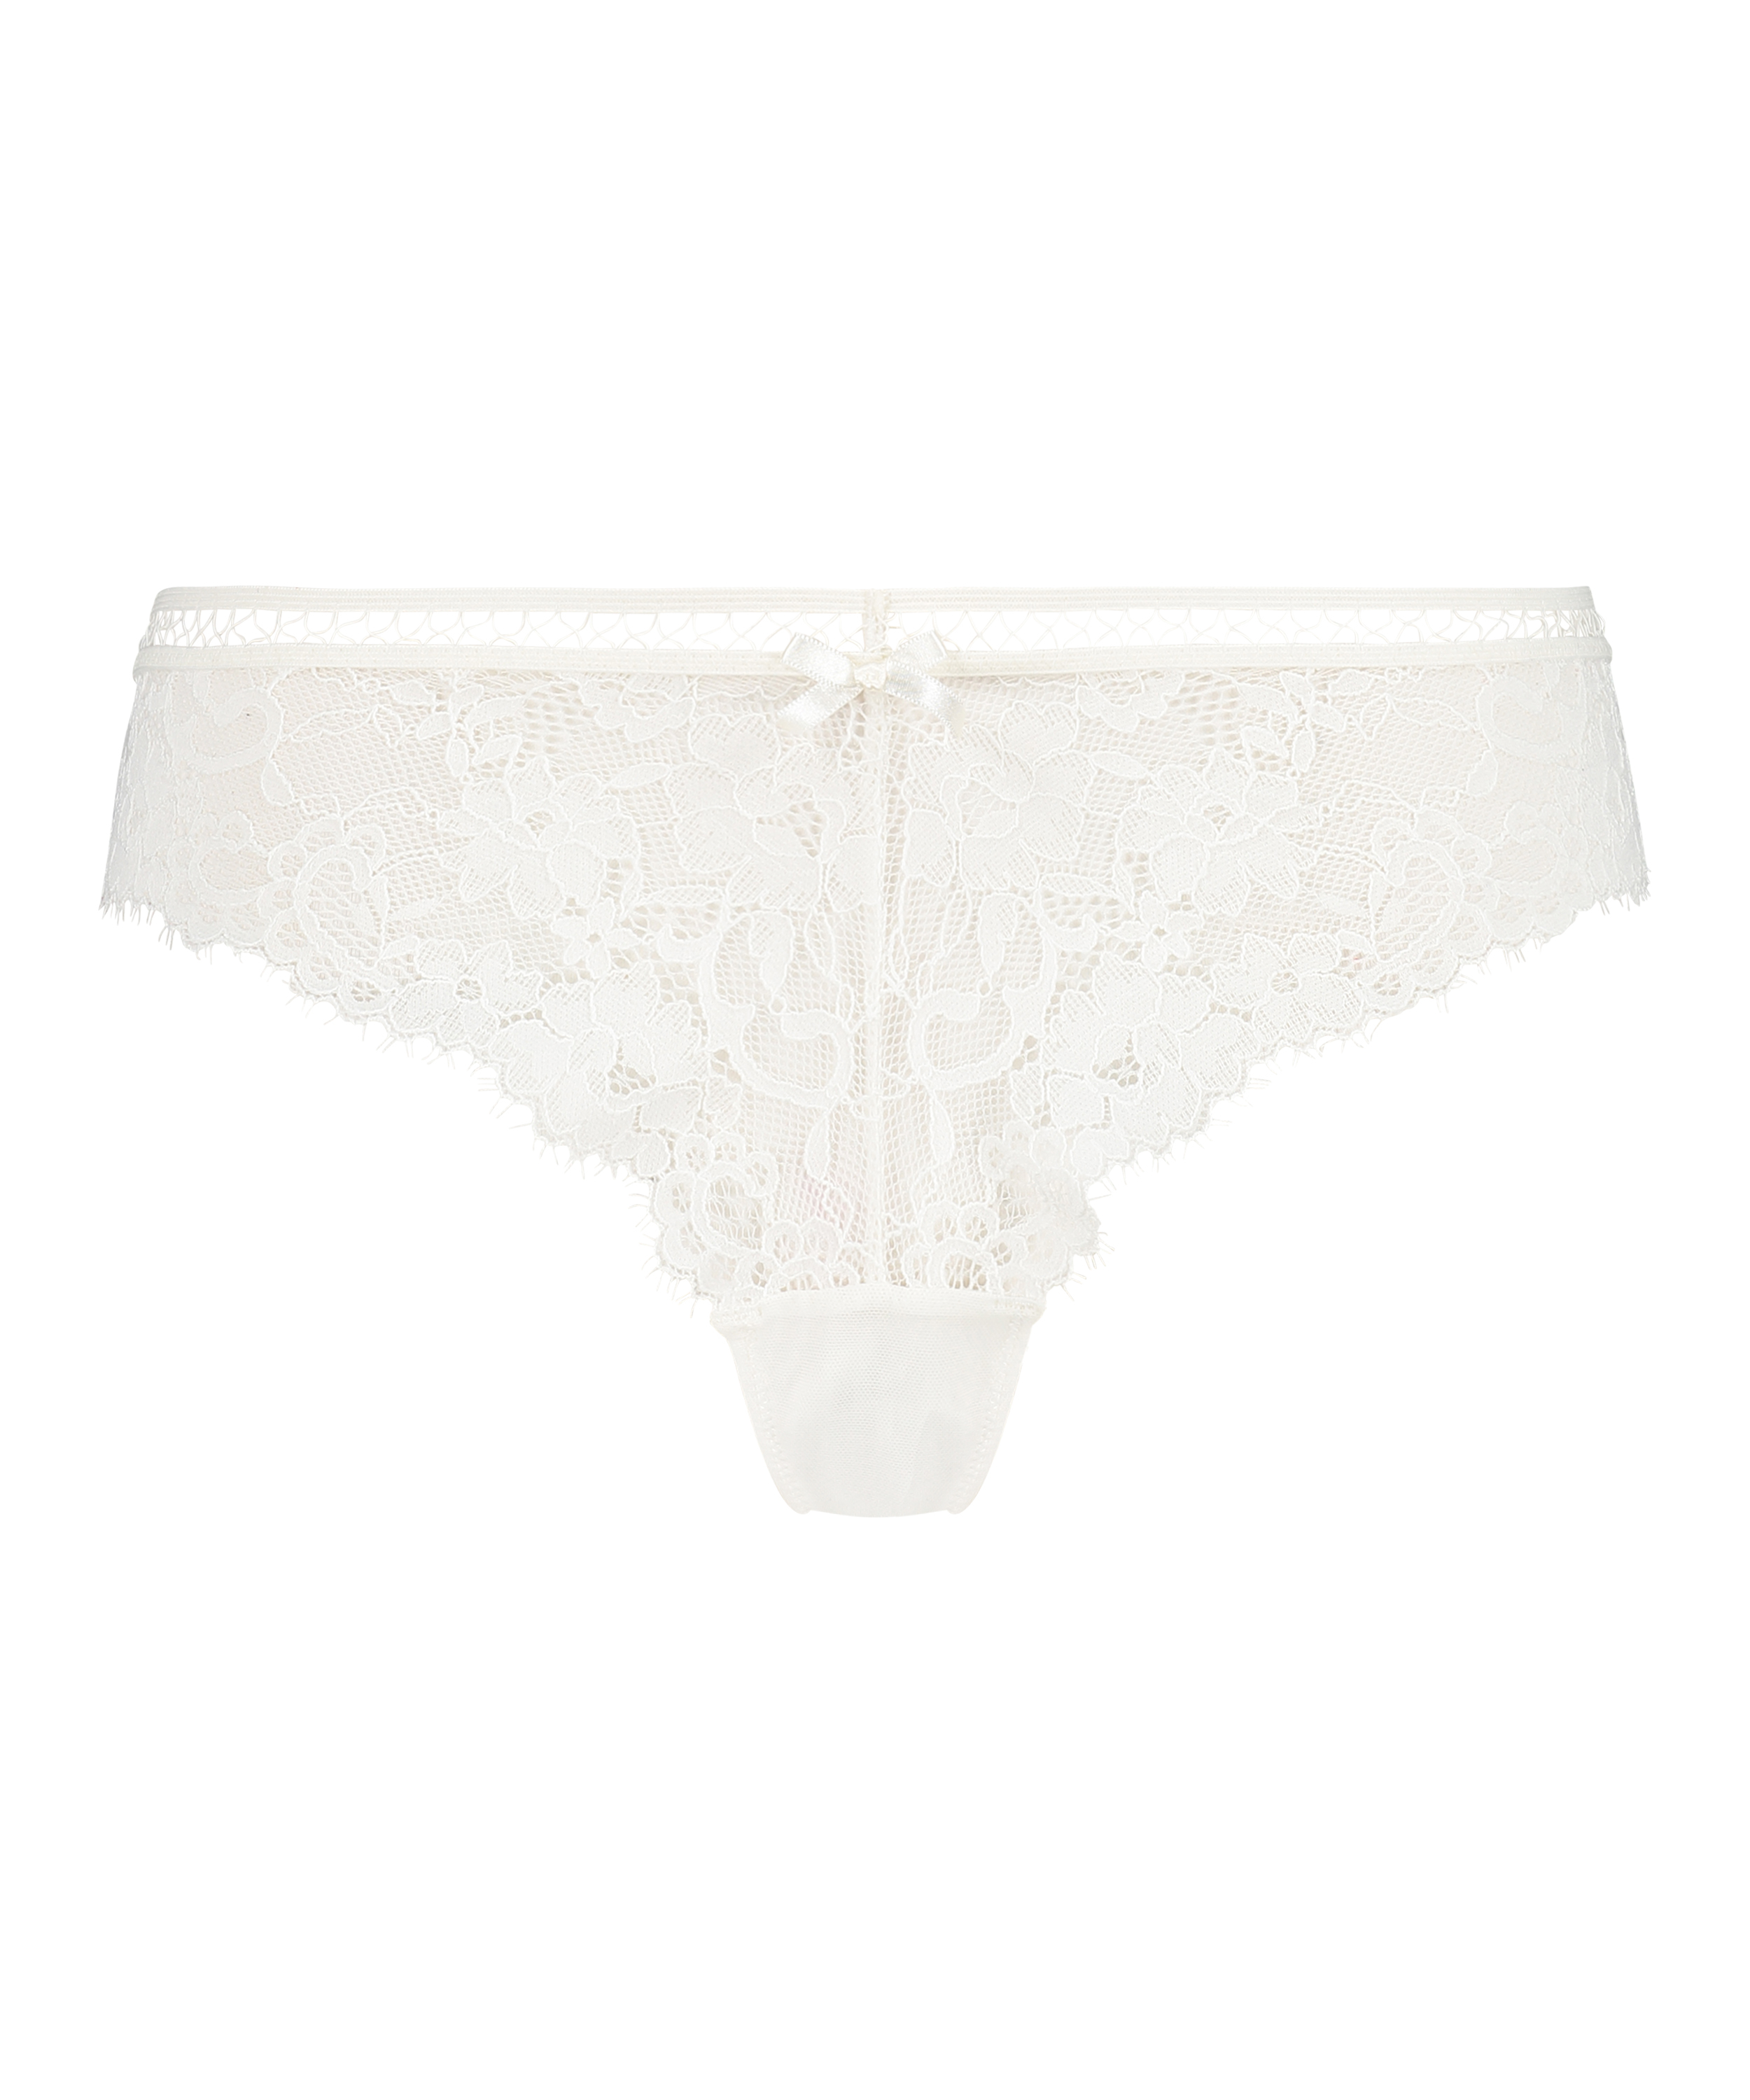 String taille extra basse Gianni, Blanc, main